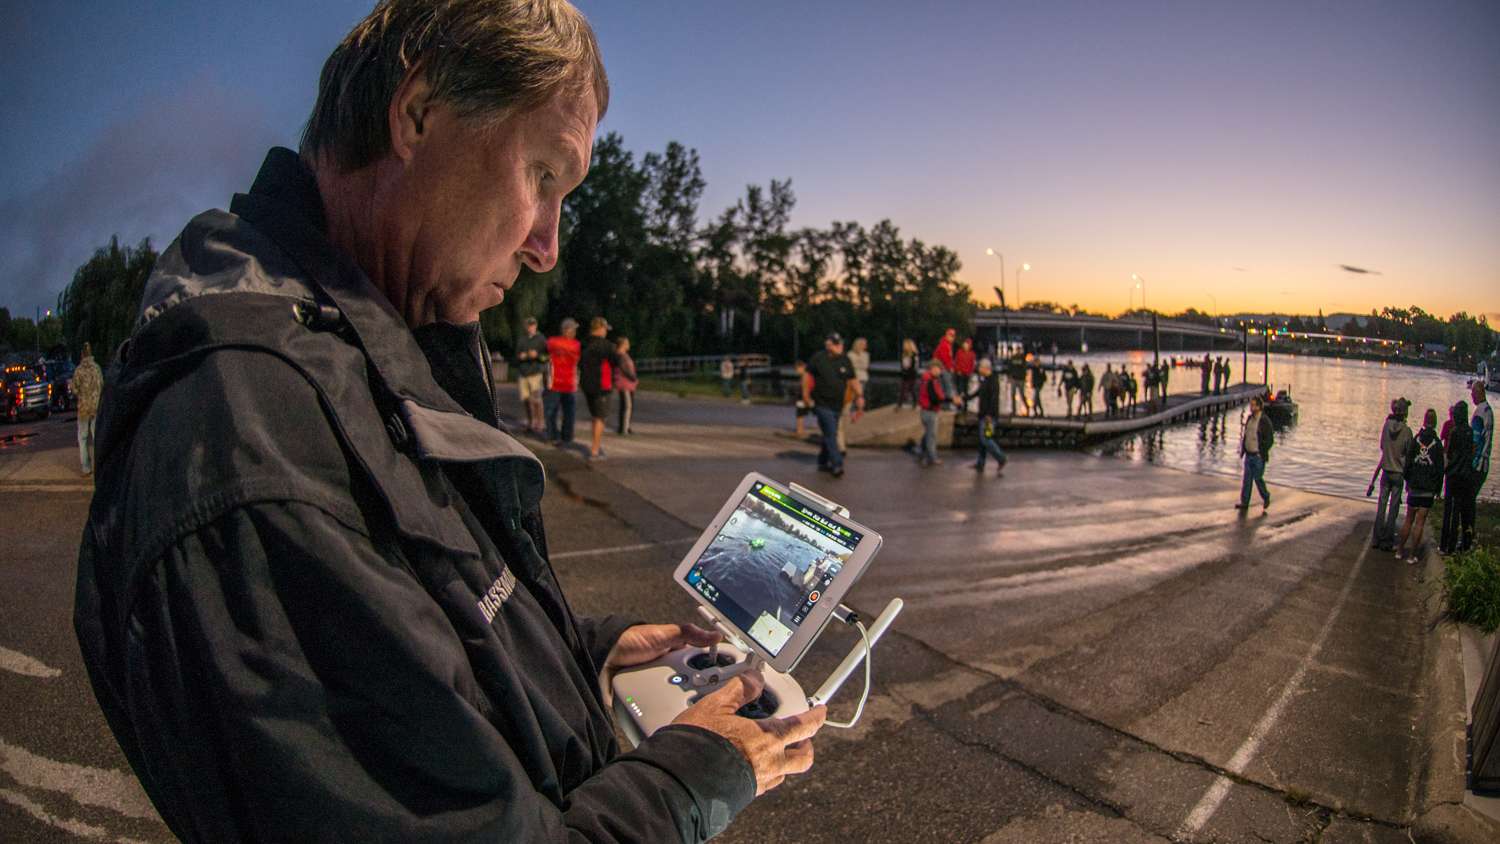 As anglers make the slow idle down the river and out of the take off area Bassmaster cameraman Carey follows them from the sky via drone.